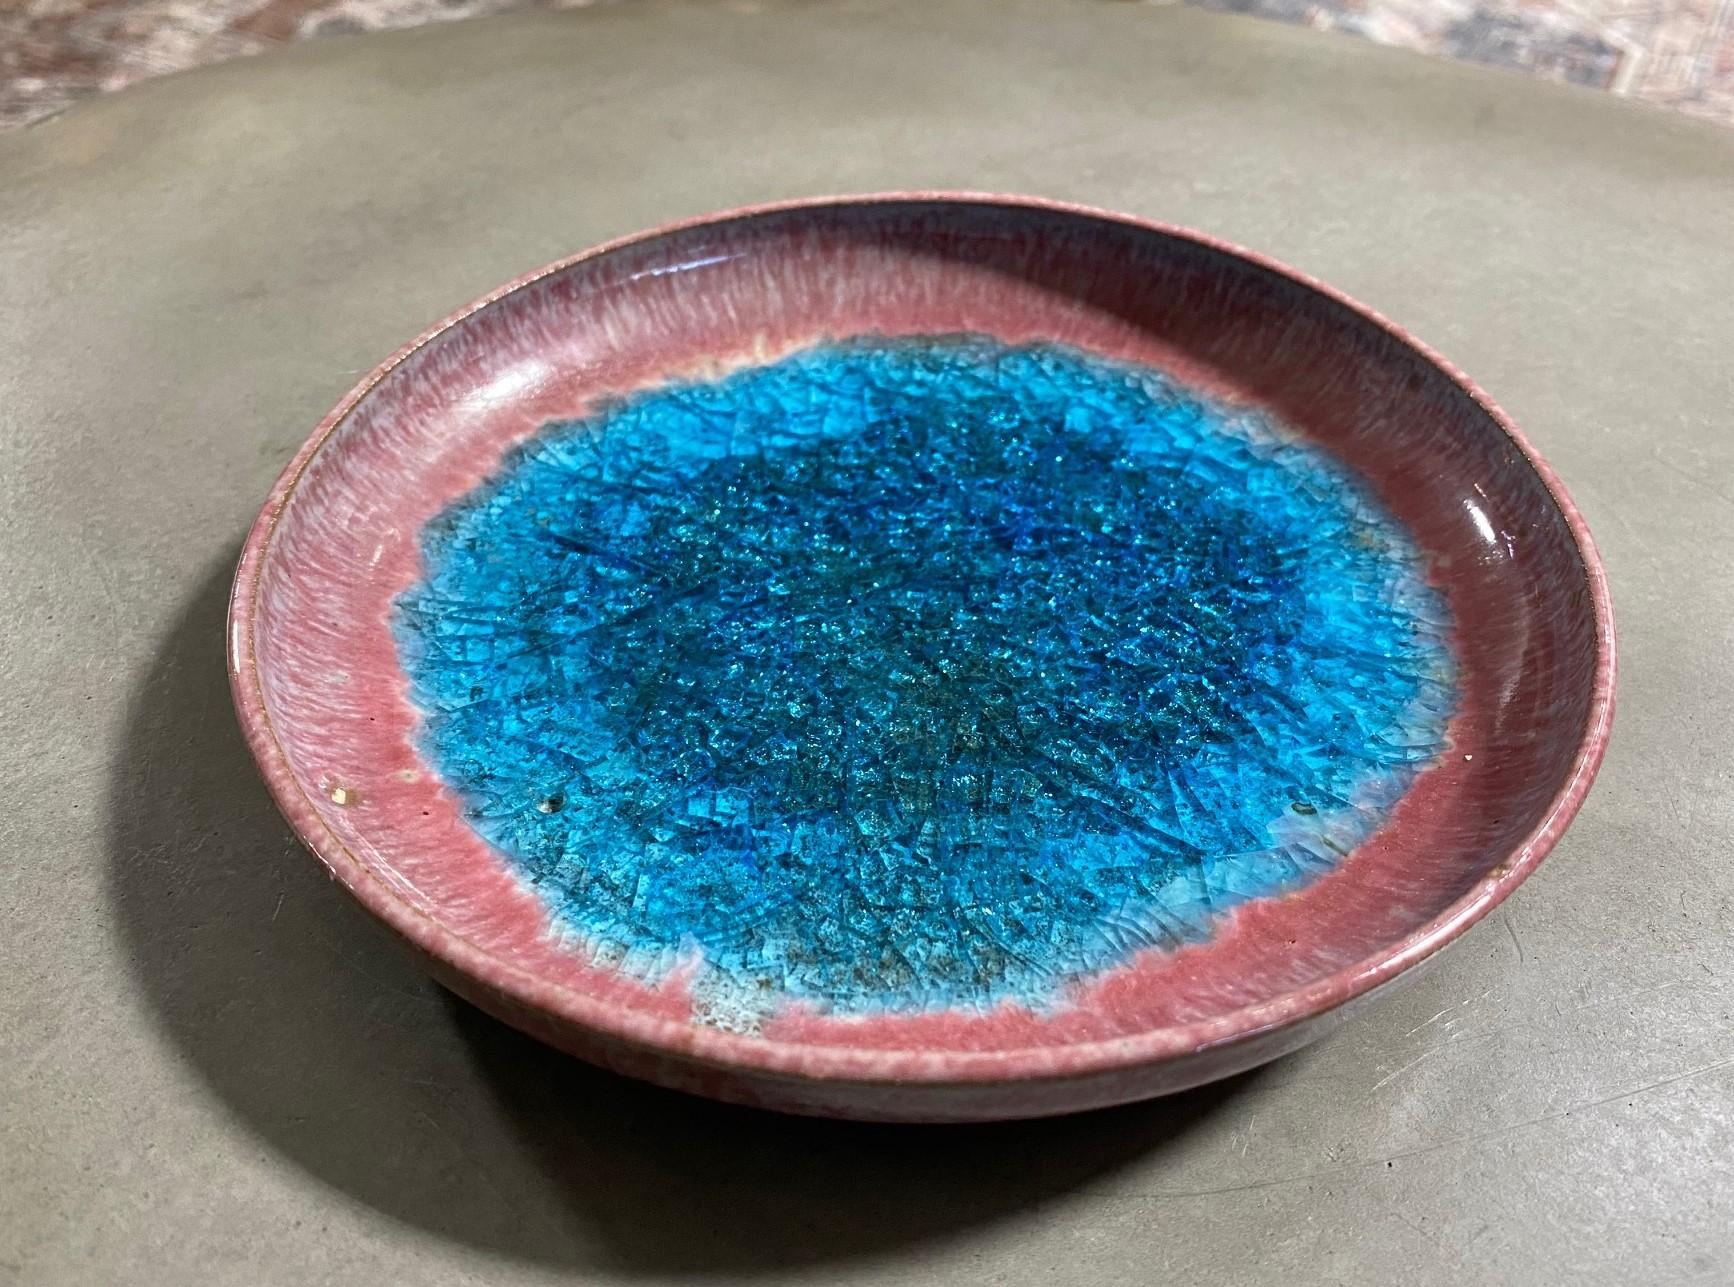 Famed California Mid-Century Modern artist Beatrice Wood signed bowl featuring a unique pink lava glaze and piercing blue crackle glass in the center of the bowl/dish. The sumptuous glaze runs down the backsides and gathers in areas underneath.